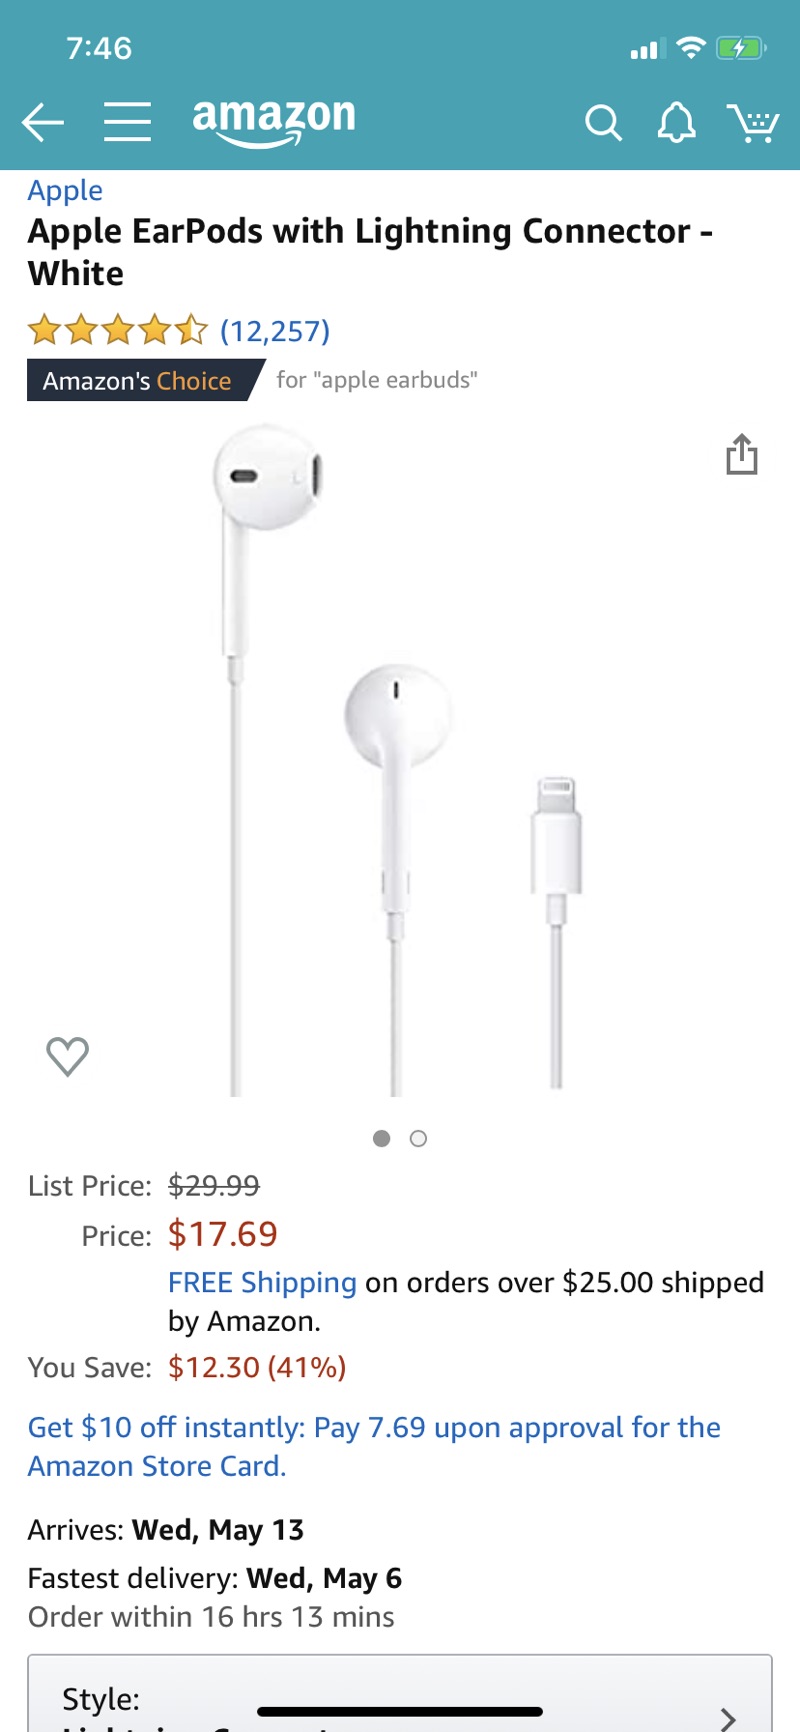 Amazon.com: Apple EarPods with Lightning Connector - White苹果耳机